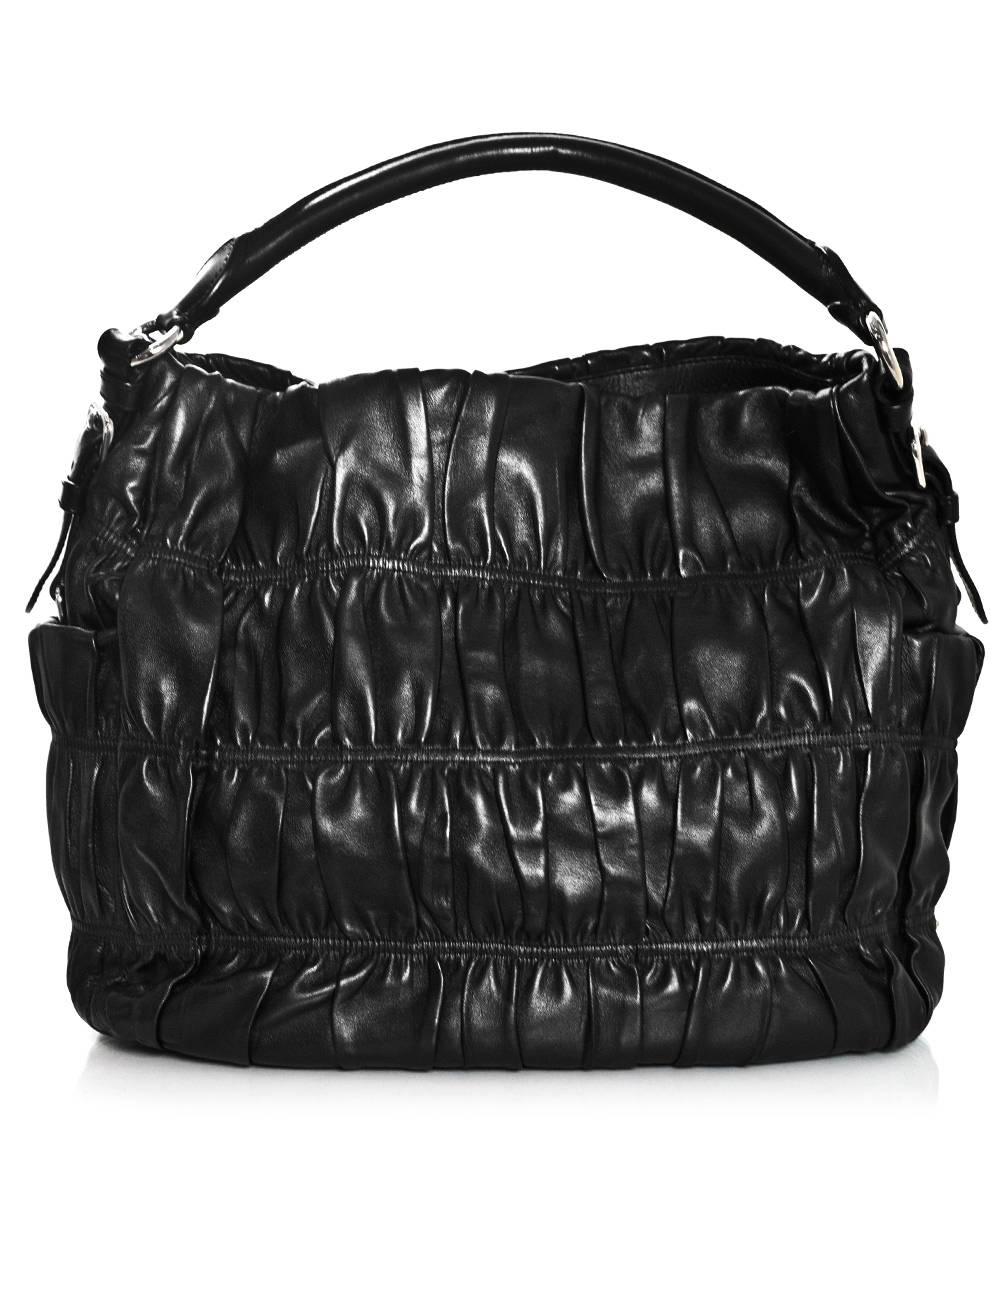 Prada Black Nappa Gaufre Leather Sacca Hobo Bag In Excellent Condition In New York, NY